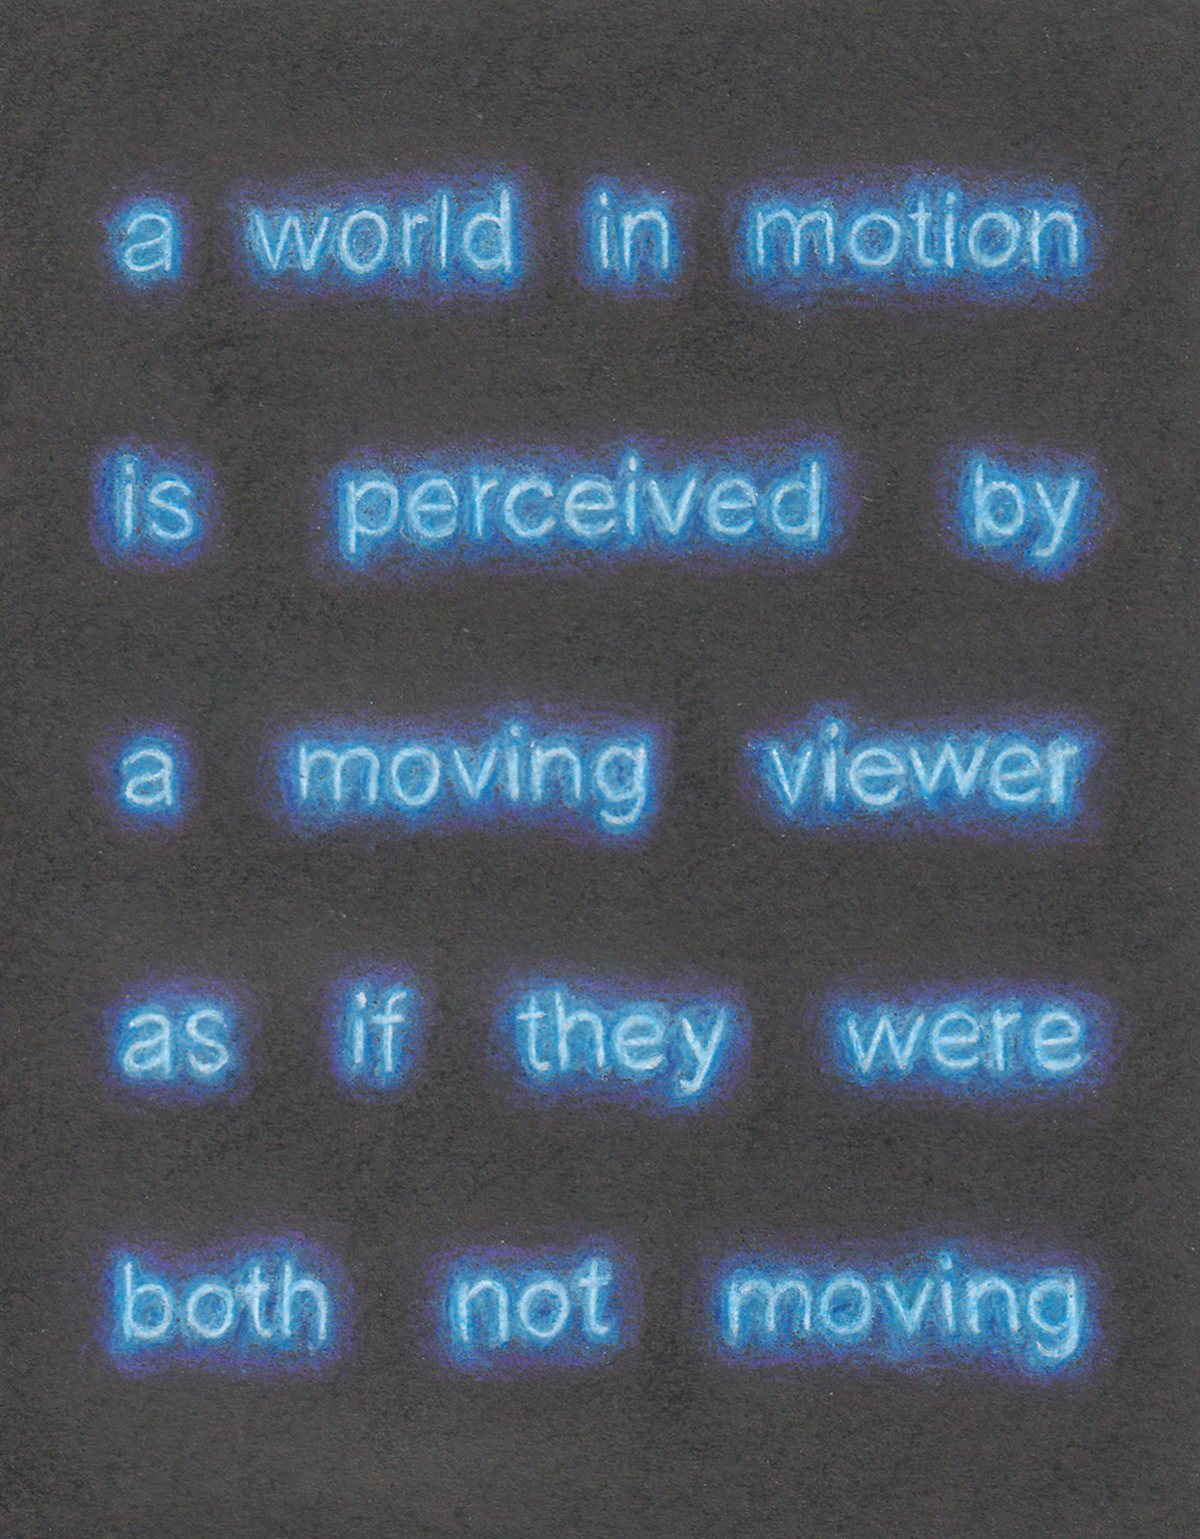 Picture for A world in motion is perceived by a moving viewer as if they were both not moving